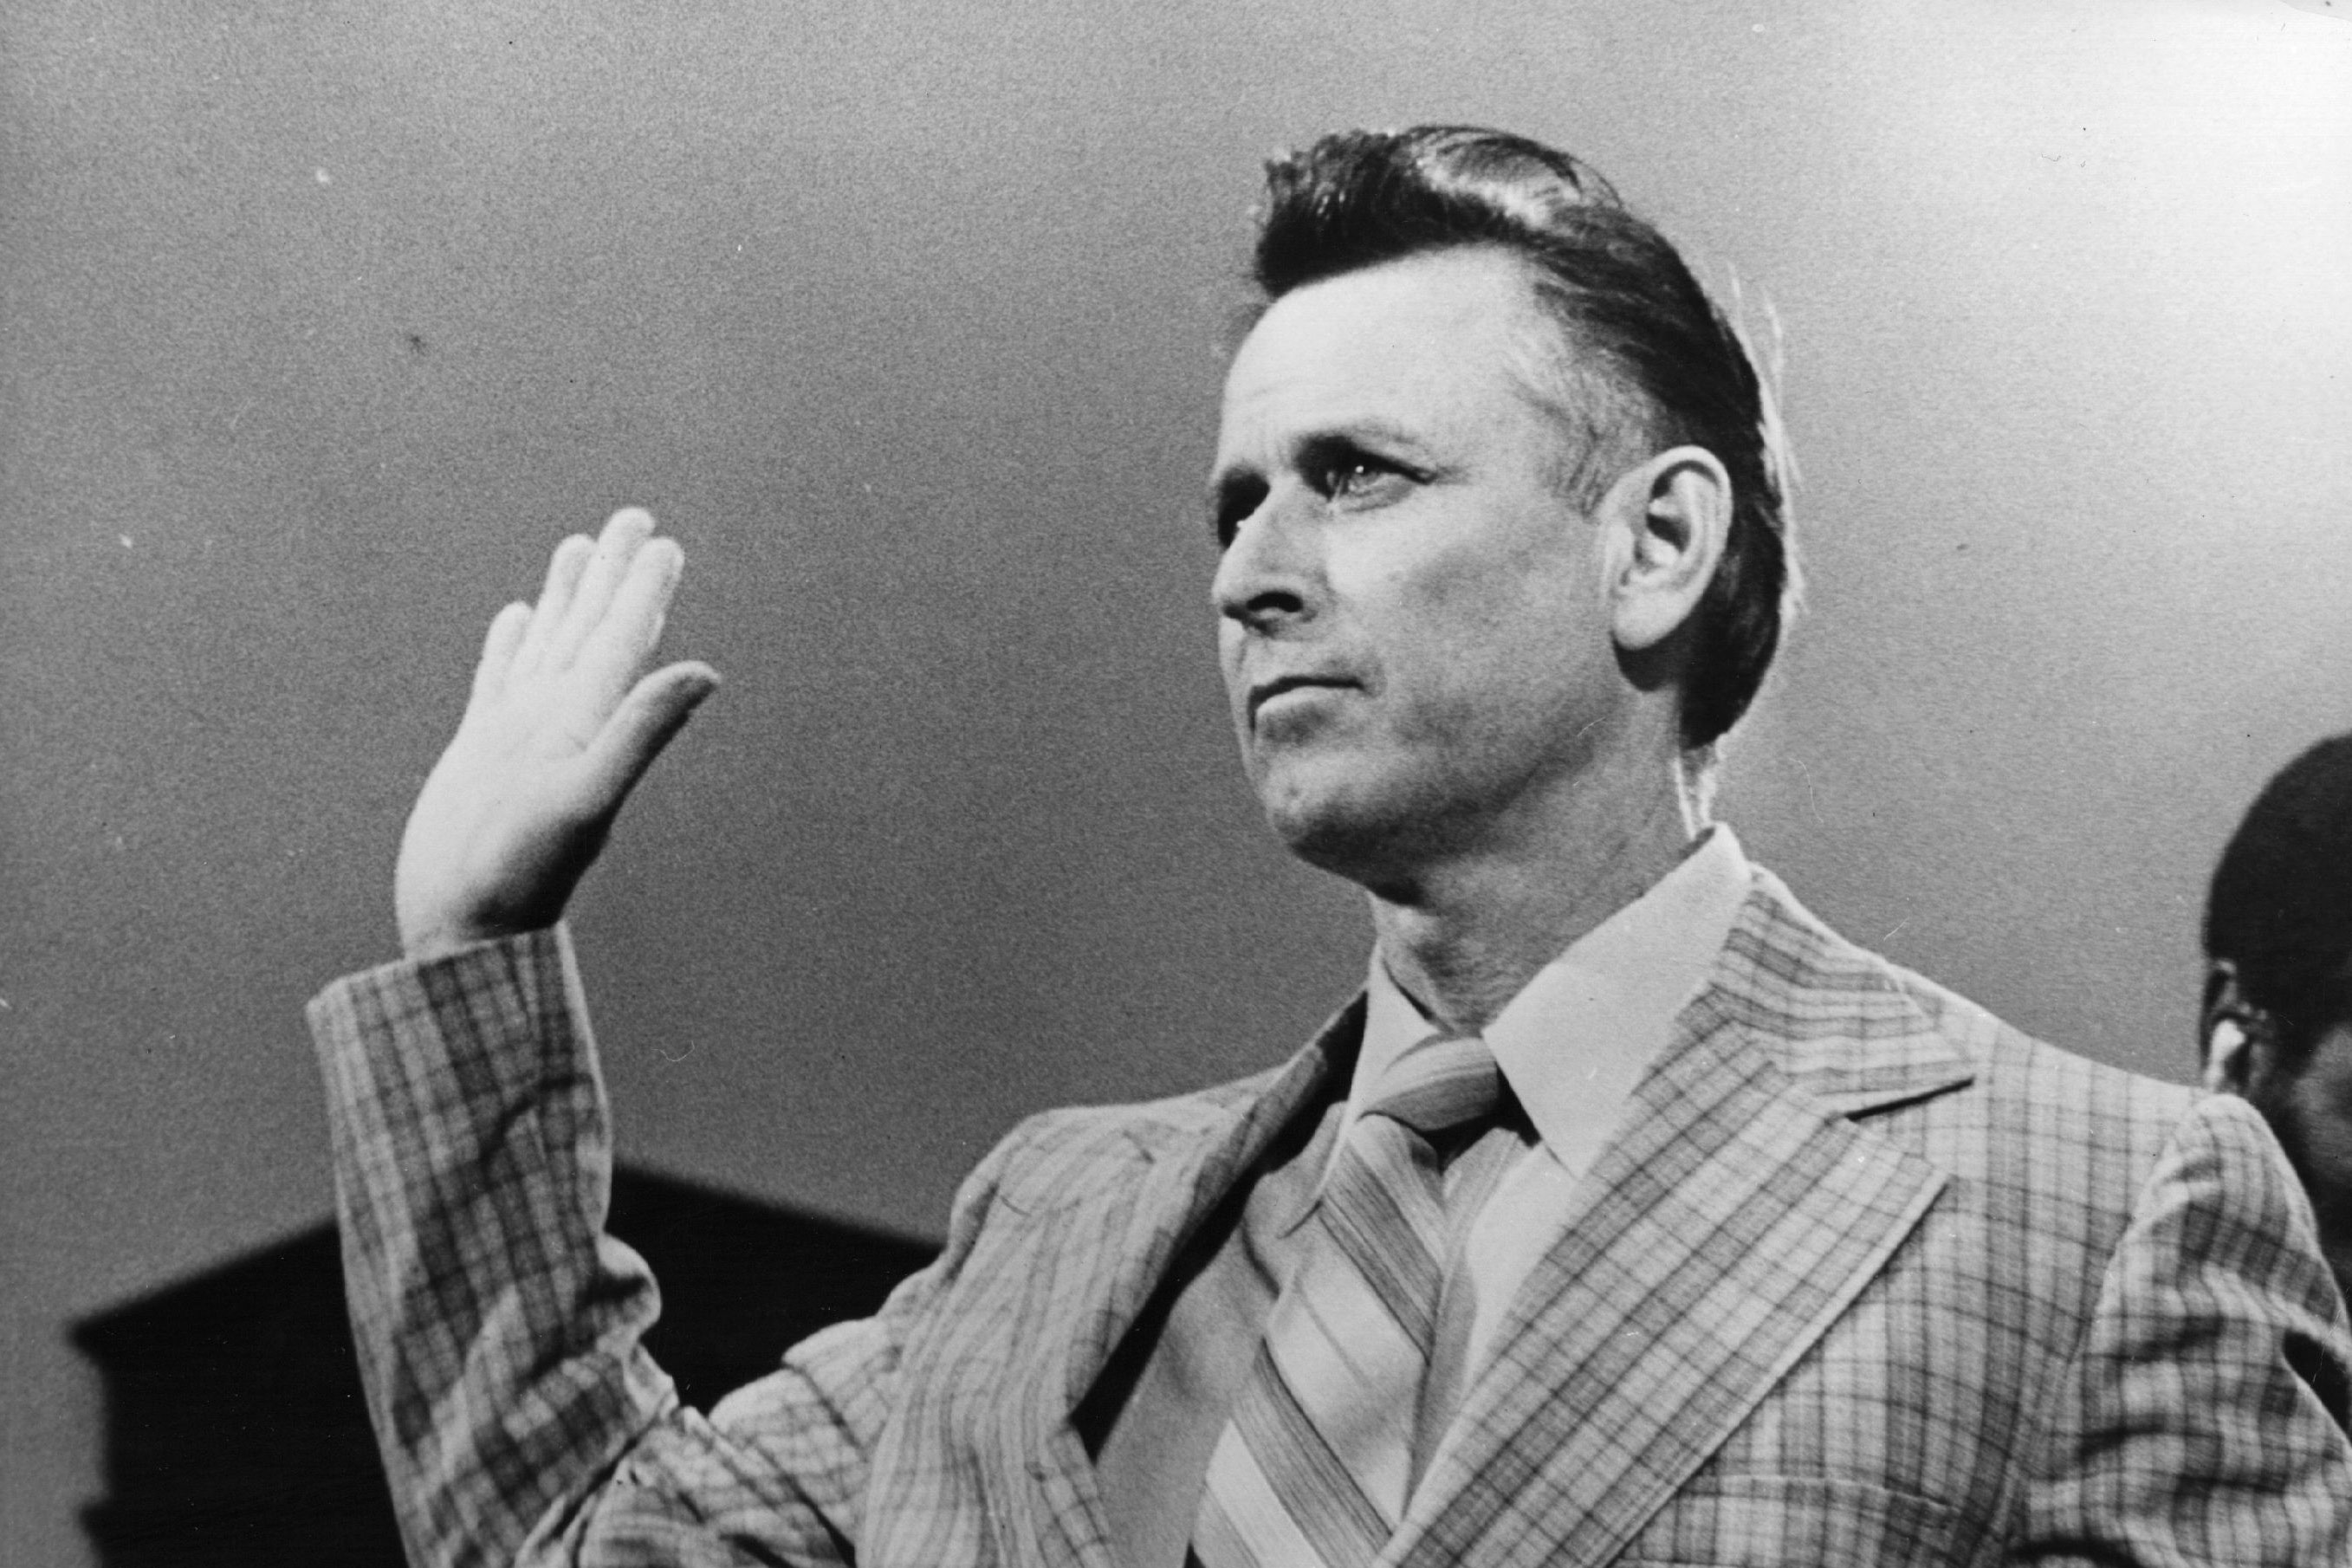 5. James Earl Ray
James Earl Ray, the man who killed King. was a criminal, who robbed gas stations and had served some time behind bars. 
He escaped from jail in 1967, and avoided the police for nearly a year. On April 4, 1968, 
he assassinated King by shooting him via a window  of a neighboring house, while he stood on the balcony of his motel room.